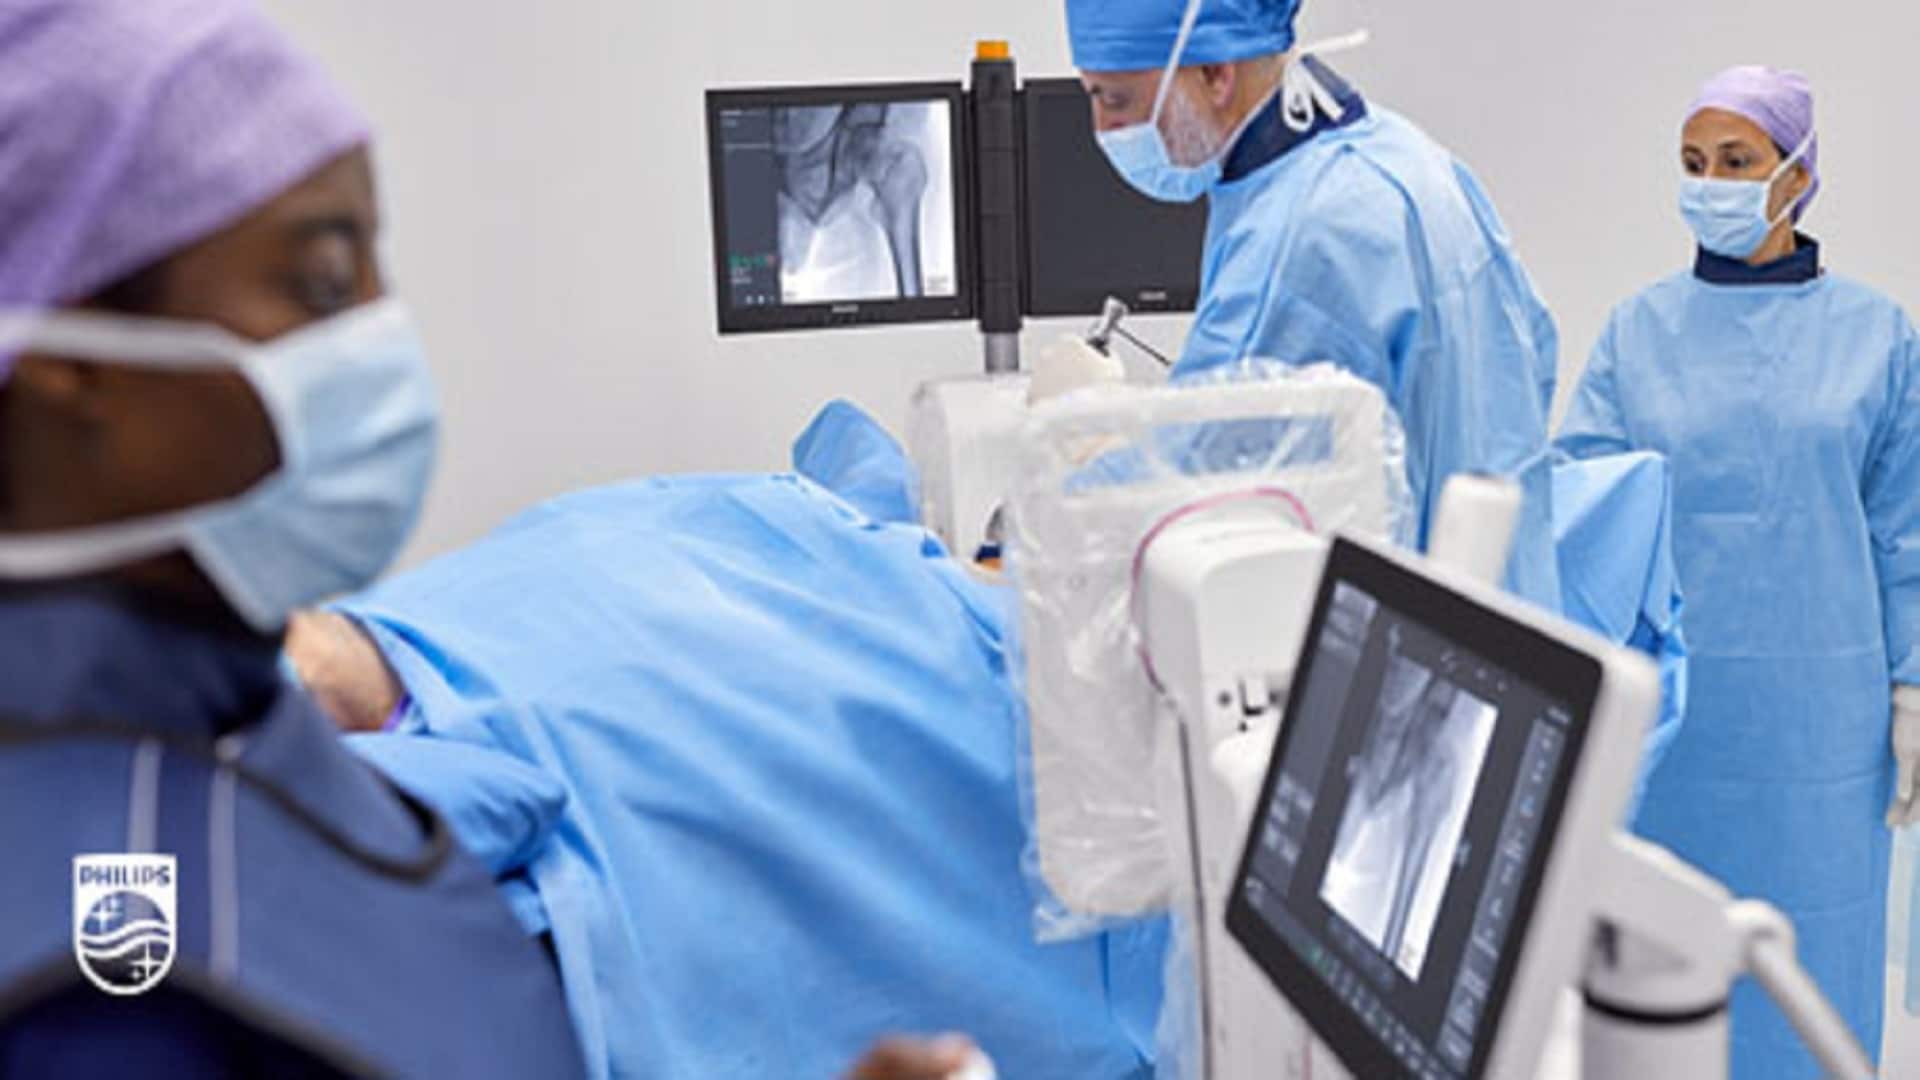 Philips further extends its mobile C-arm range with the Zenition 30, alleviating staff shortages by empowering surgeons with greater autonomy and personalisation.